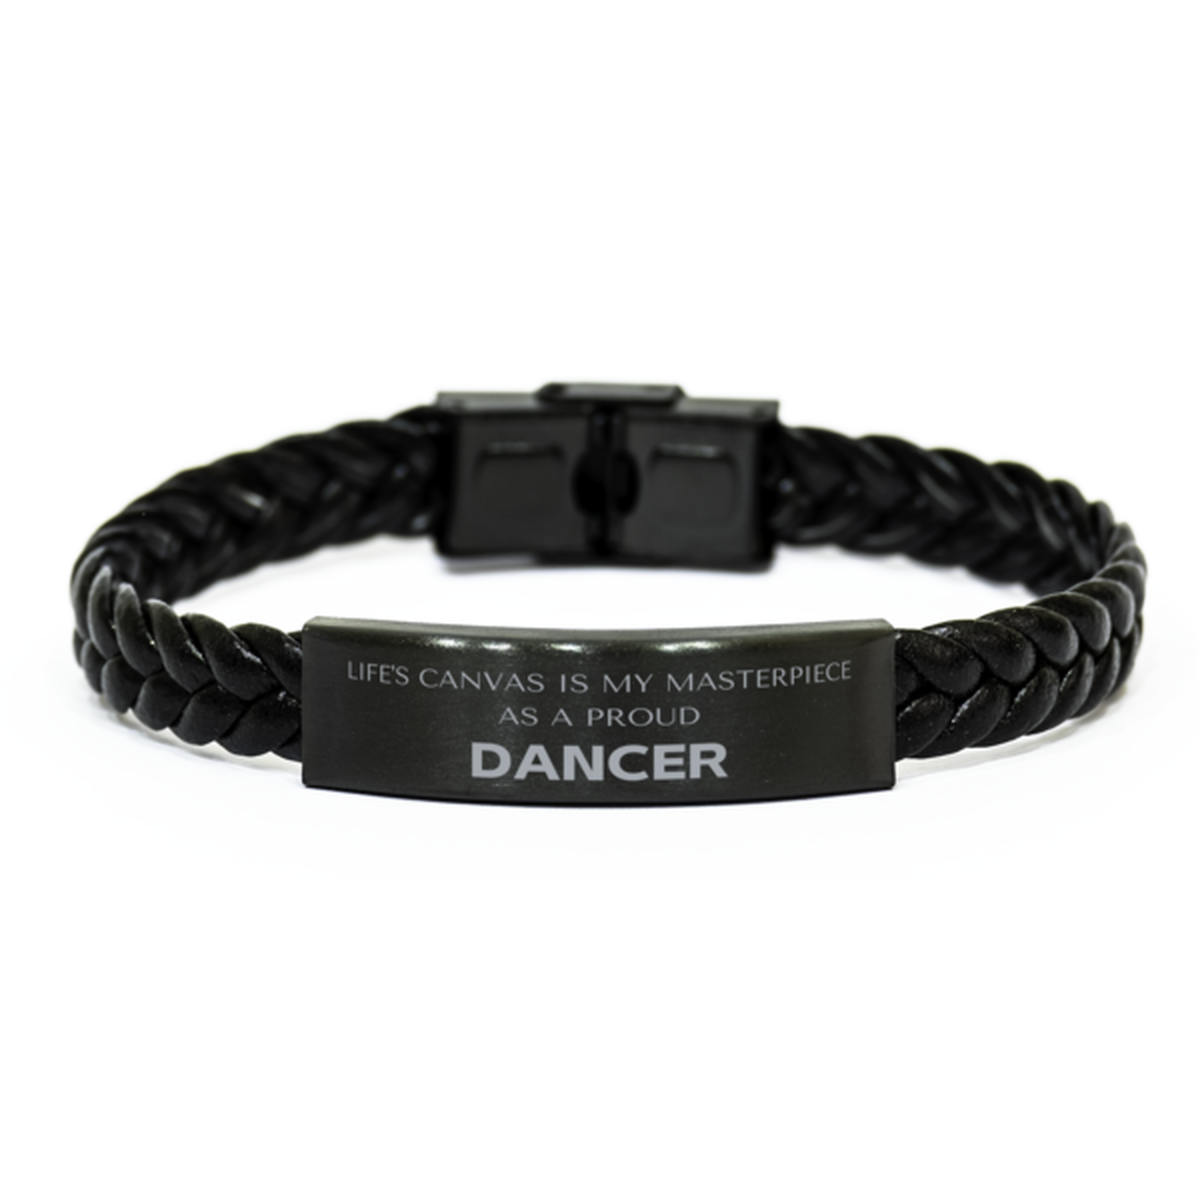 Proud Dancer Gifts, Life's canvas is my masterpiece, Epic Birthday Christmas Unique Braided Leather Bracelet For Dancer, Coworkers, Men, Women, Friends